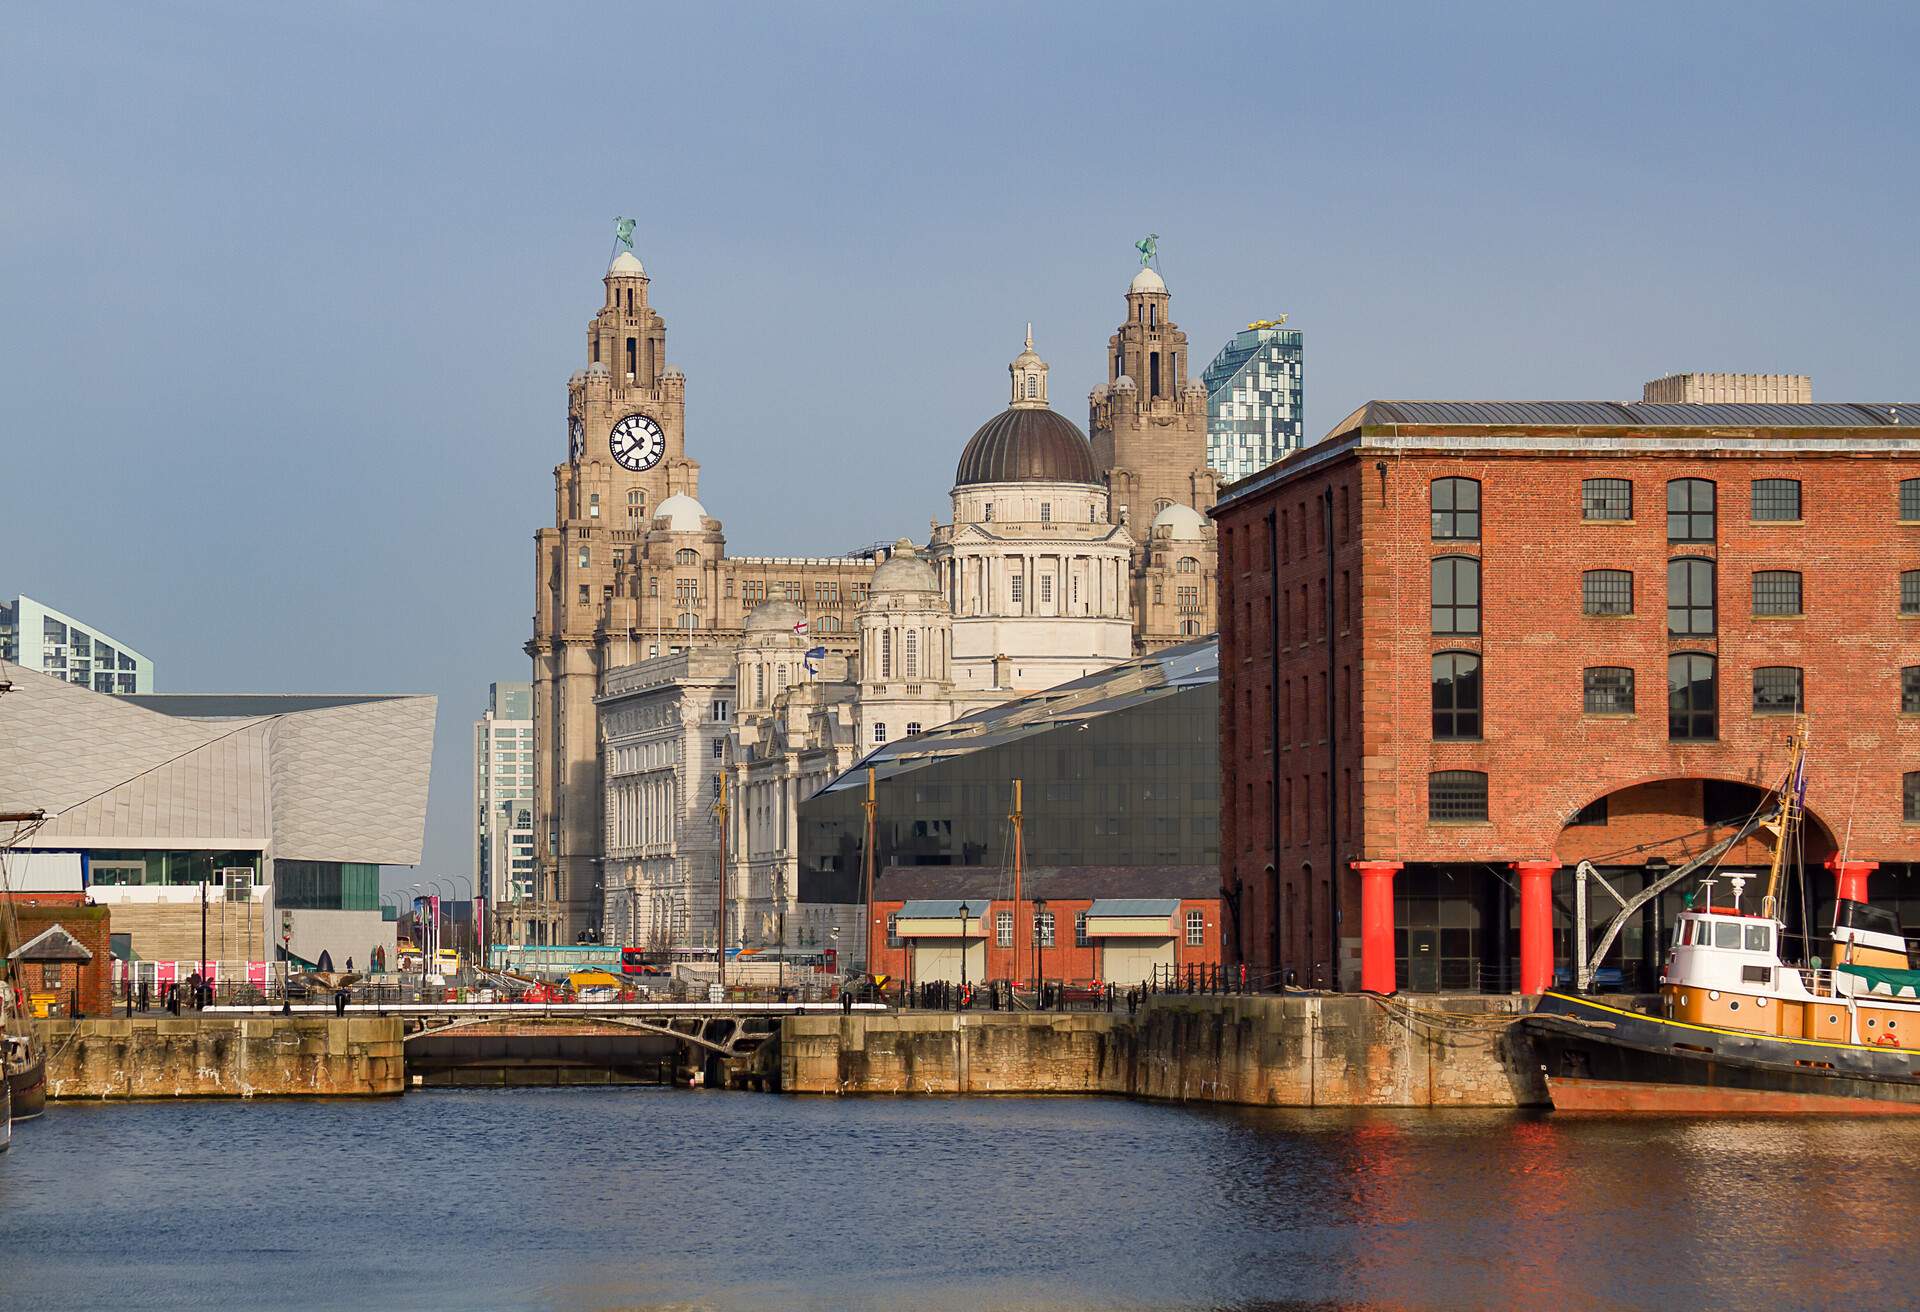 A cityscape view of Liverpool, uk, taken from the Albert dock and showing the maritime and Liver buildings in the distance